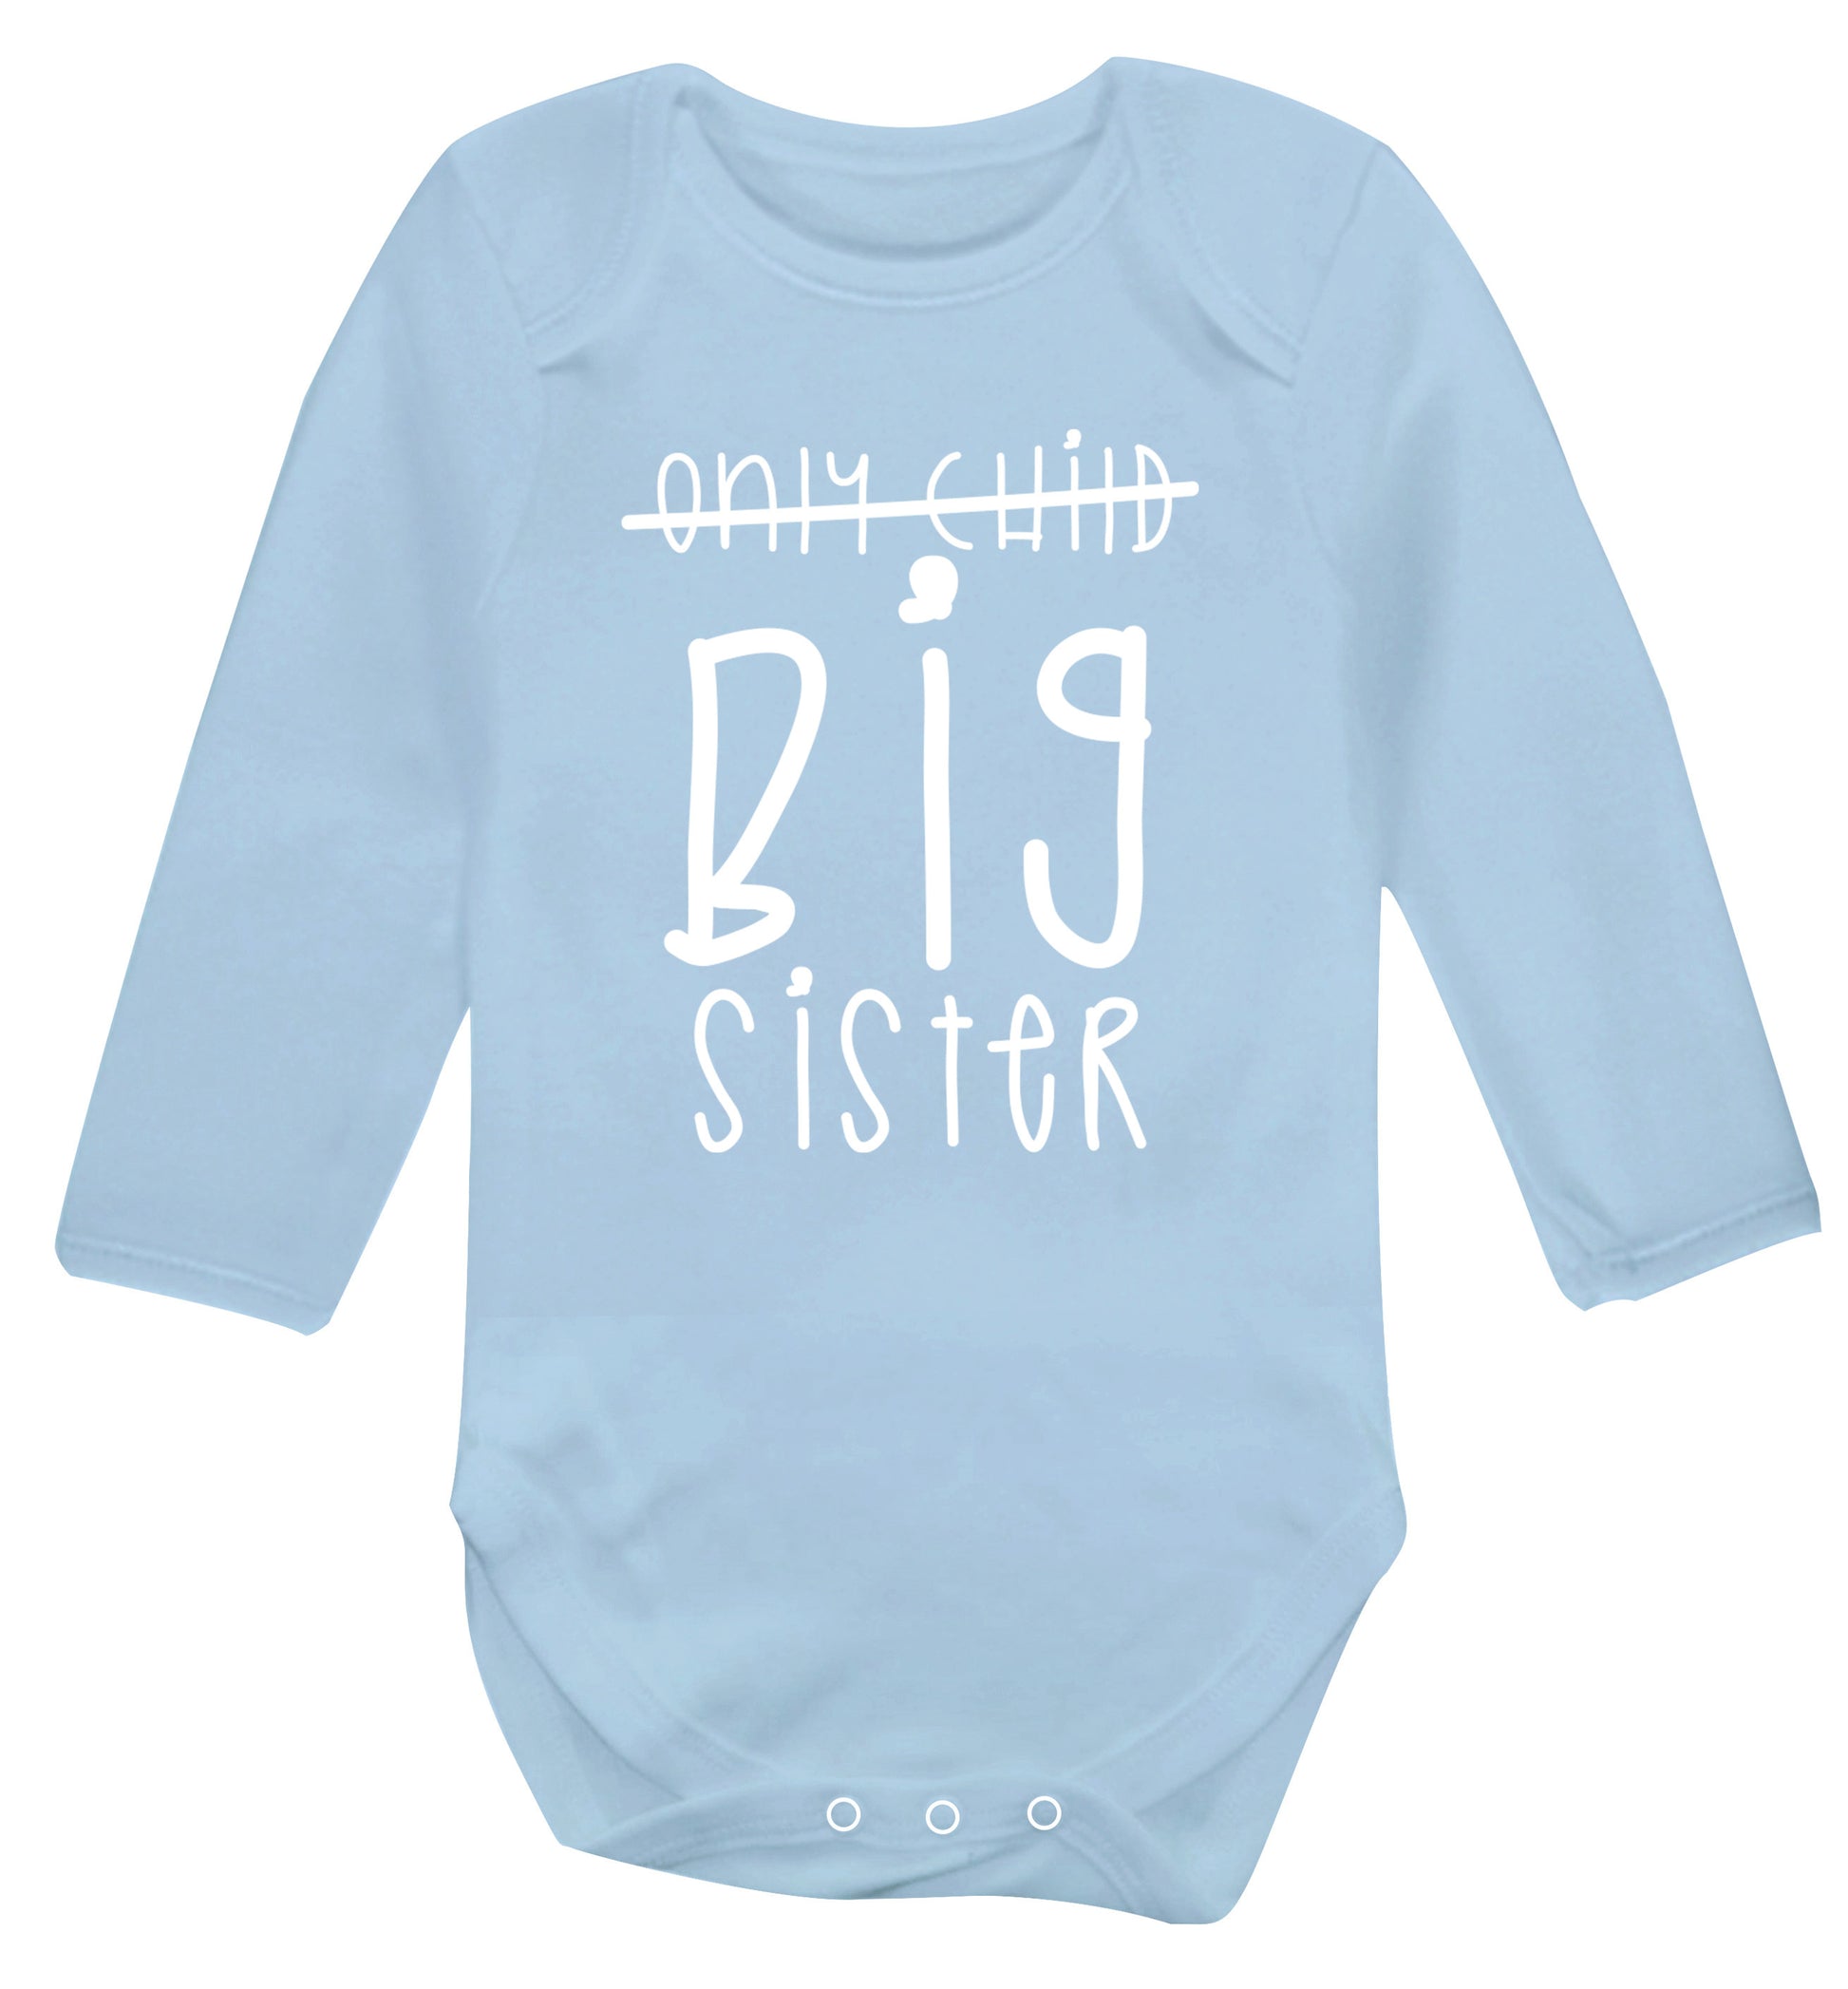 Only child big sister Baby Vest long sleeved pale blue 6-12 months